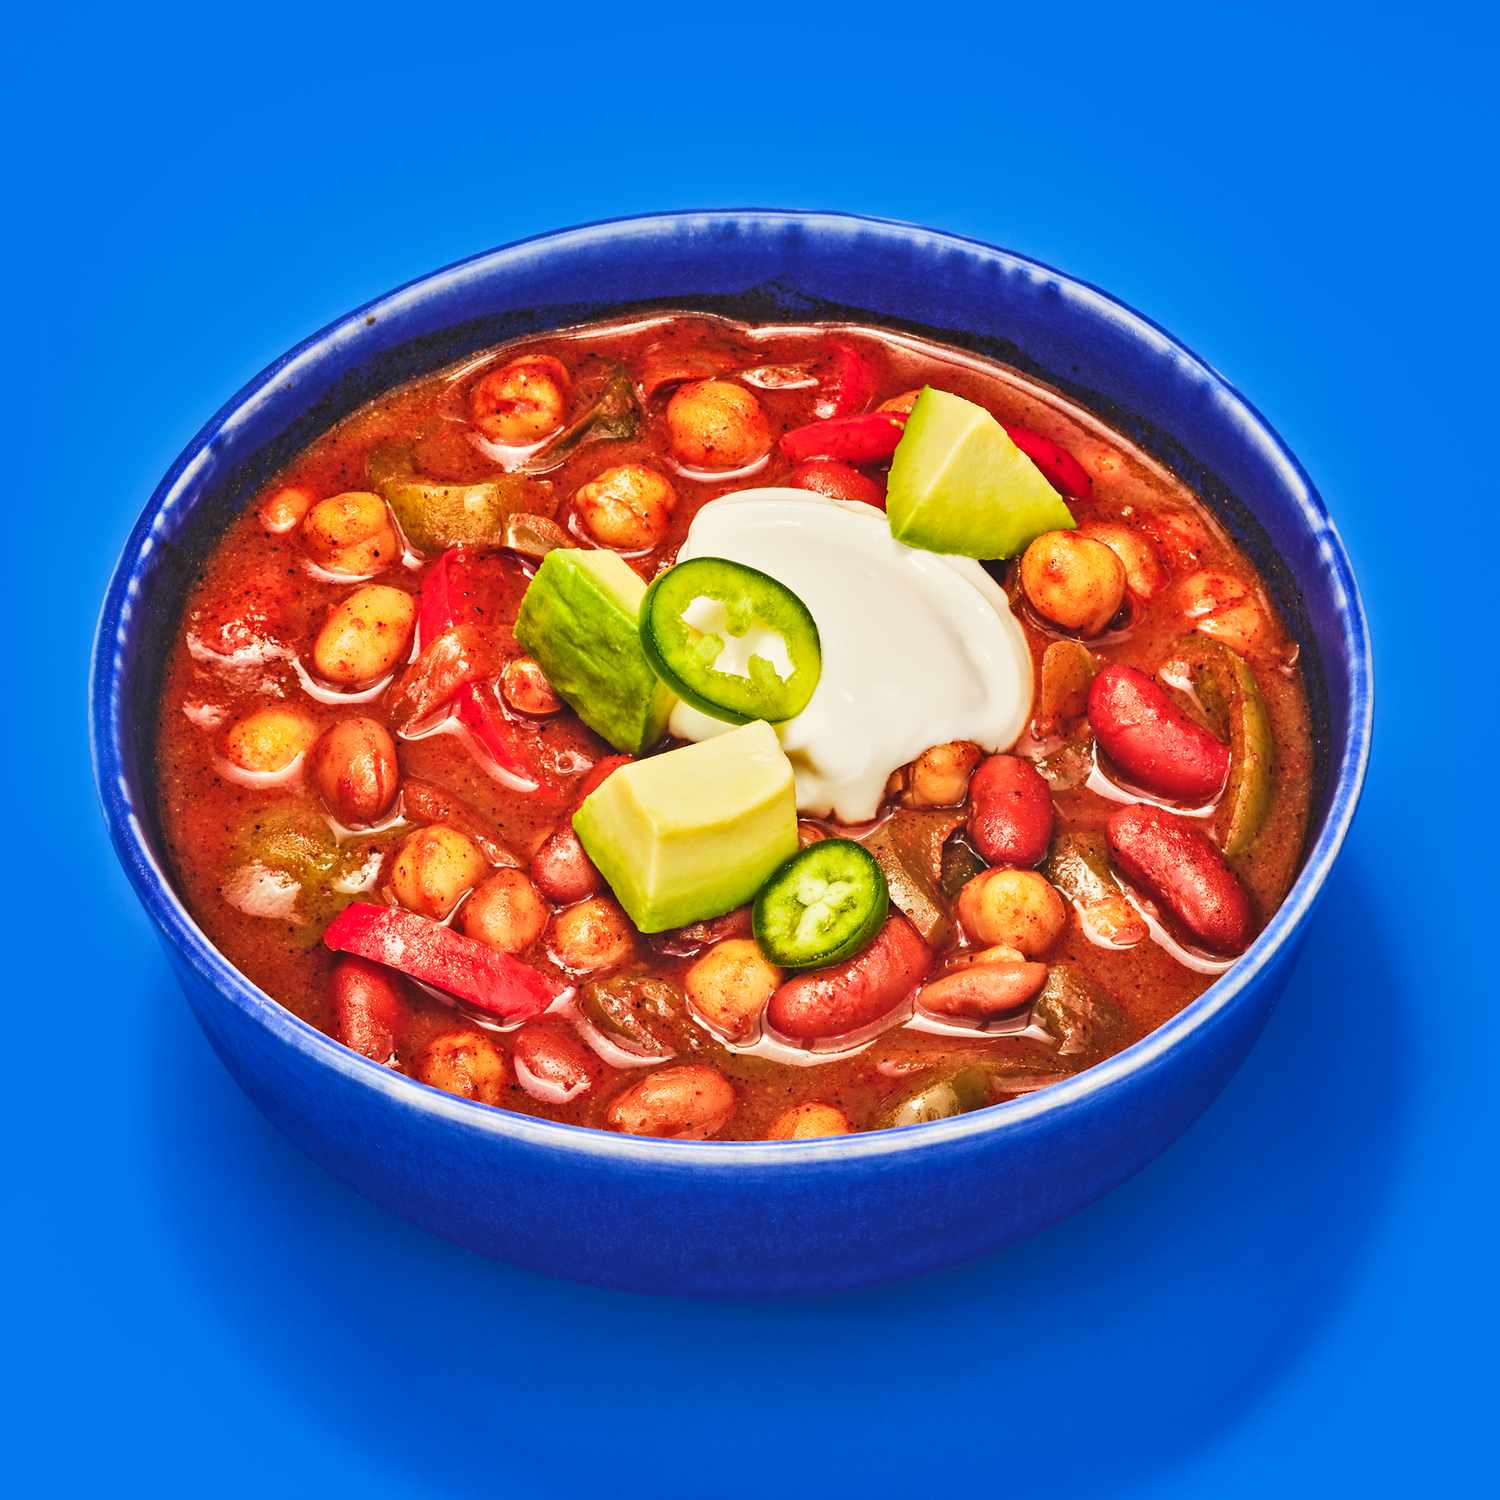 Vegetarian Chili with Salad Beans